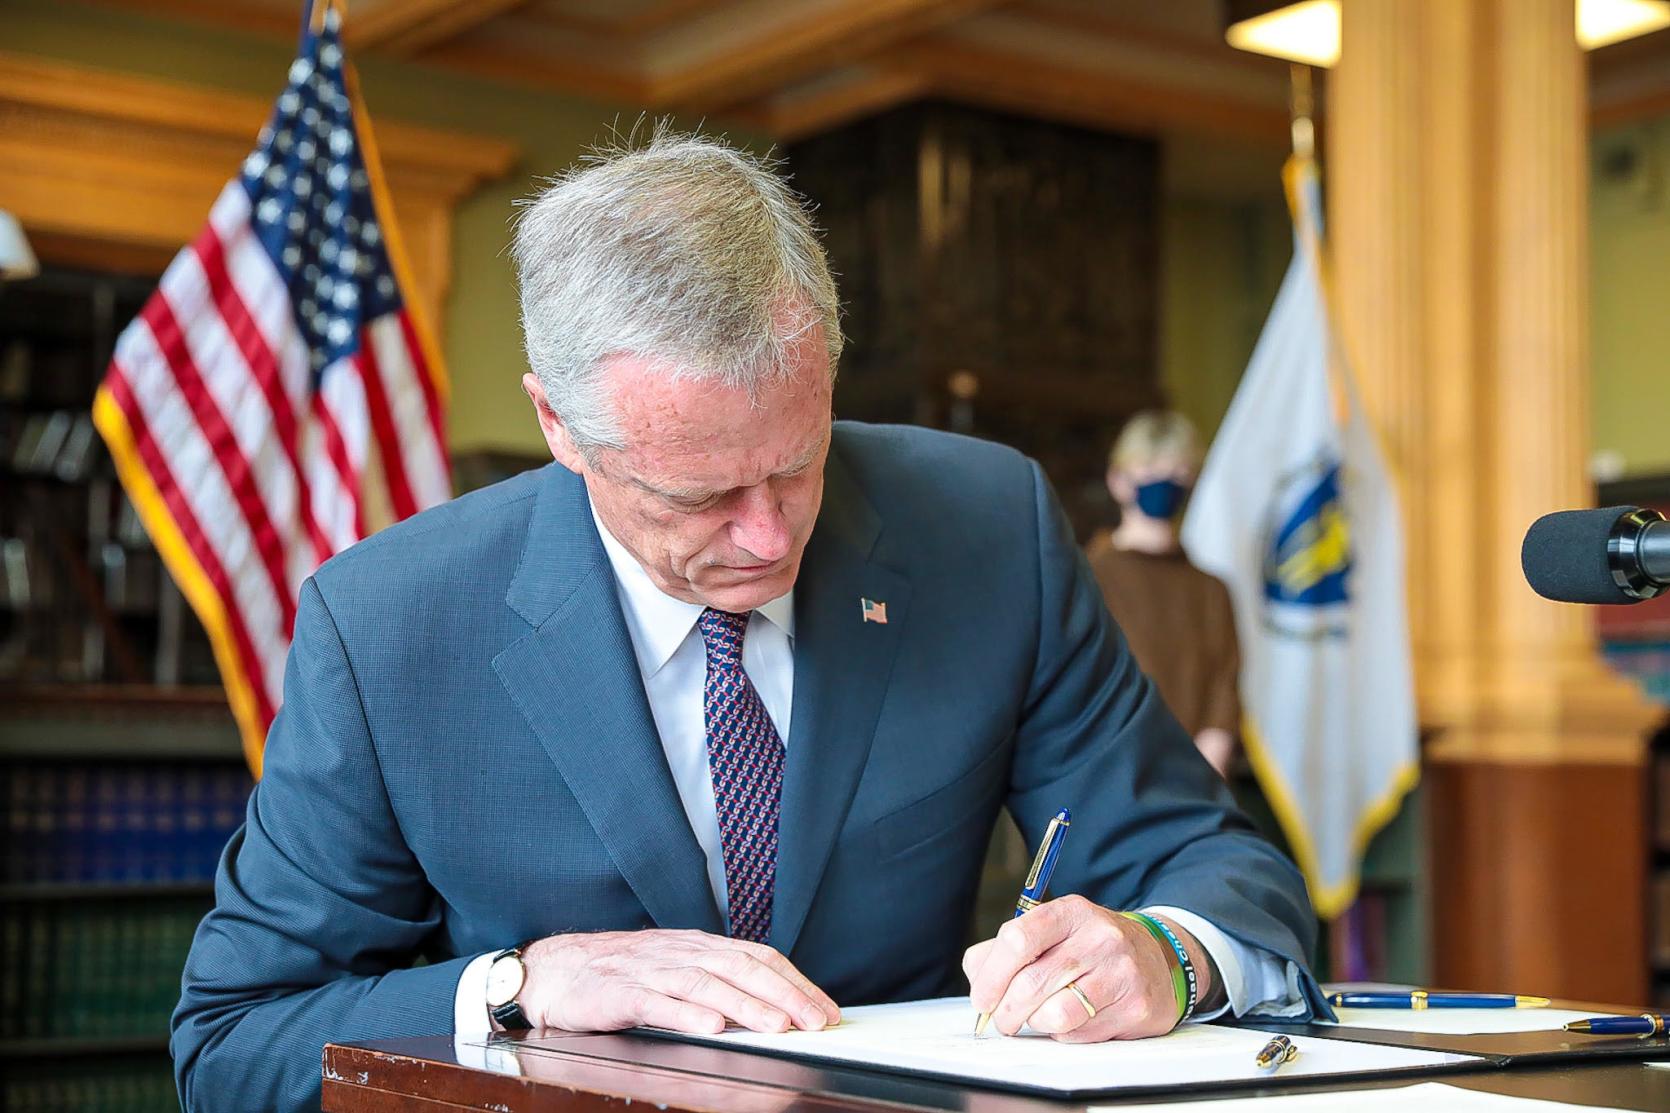 Governor Baker Issues Order Rescinding COVID-19 Restrictions on May 29 and Terminating State of Emergency Effective June 15